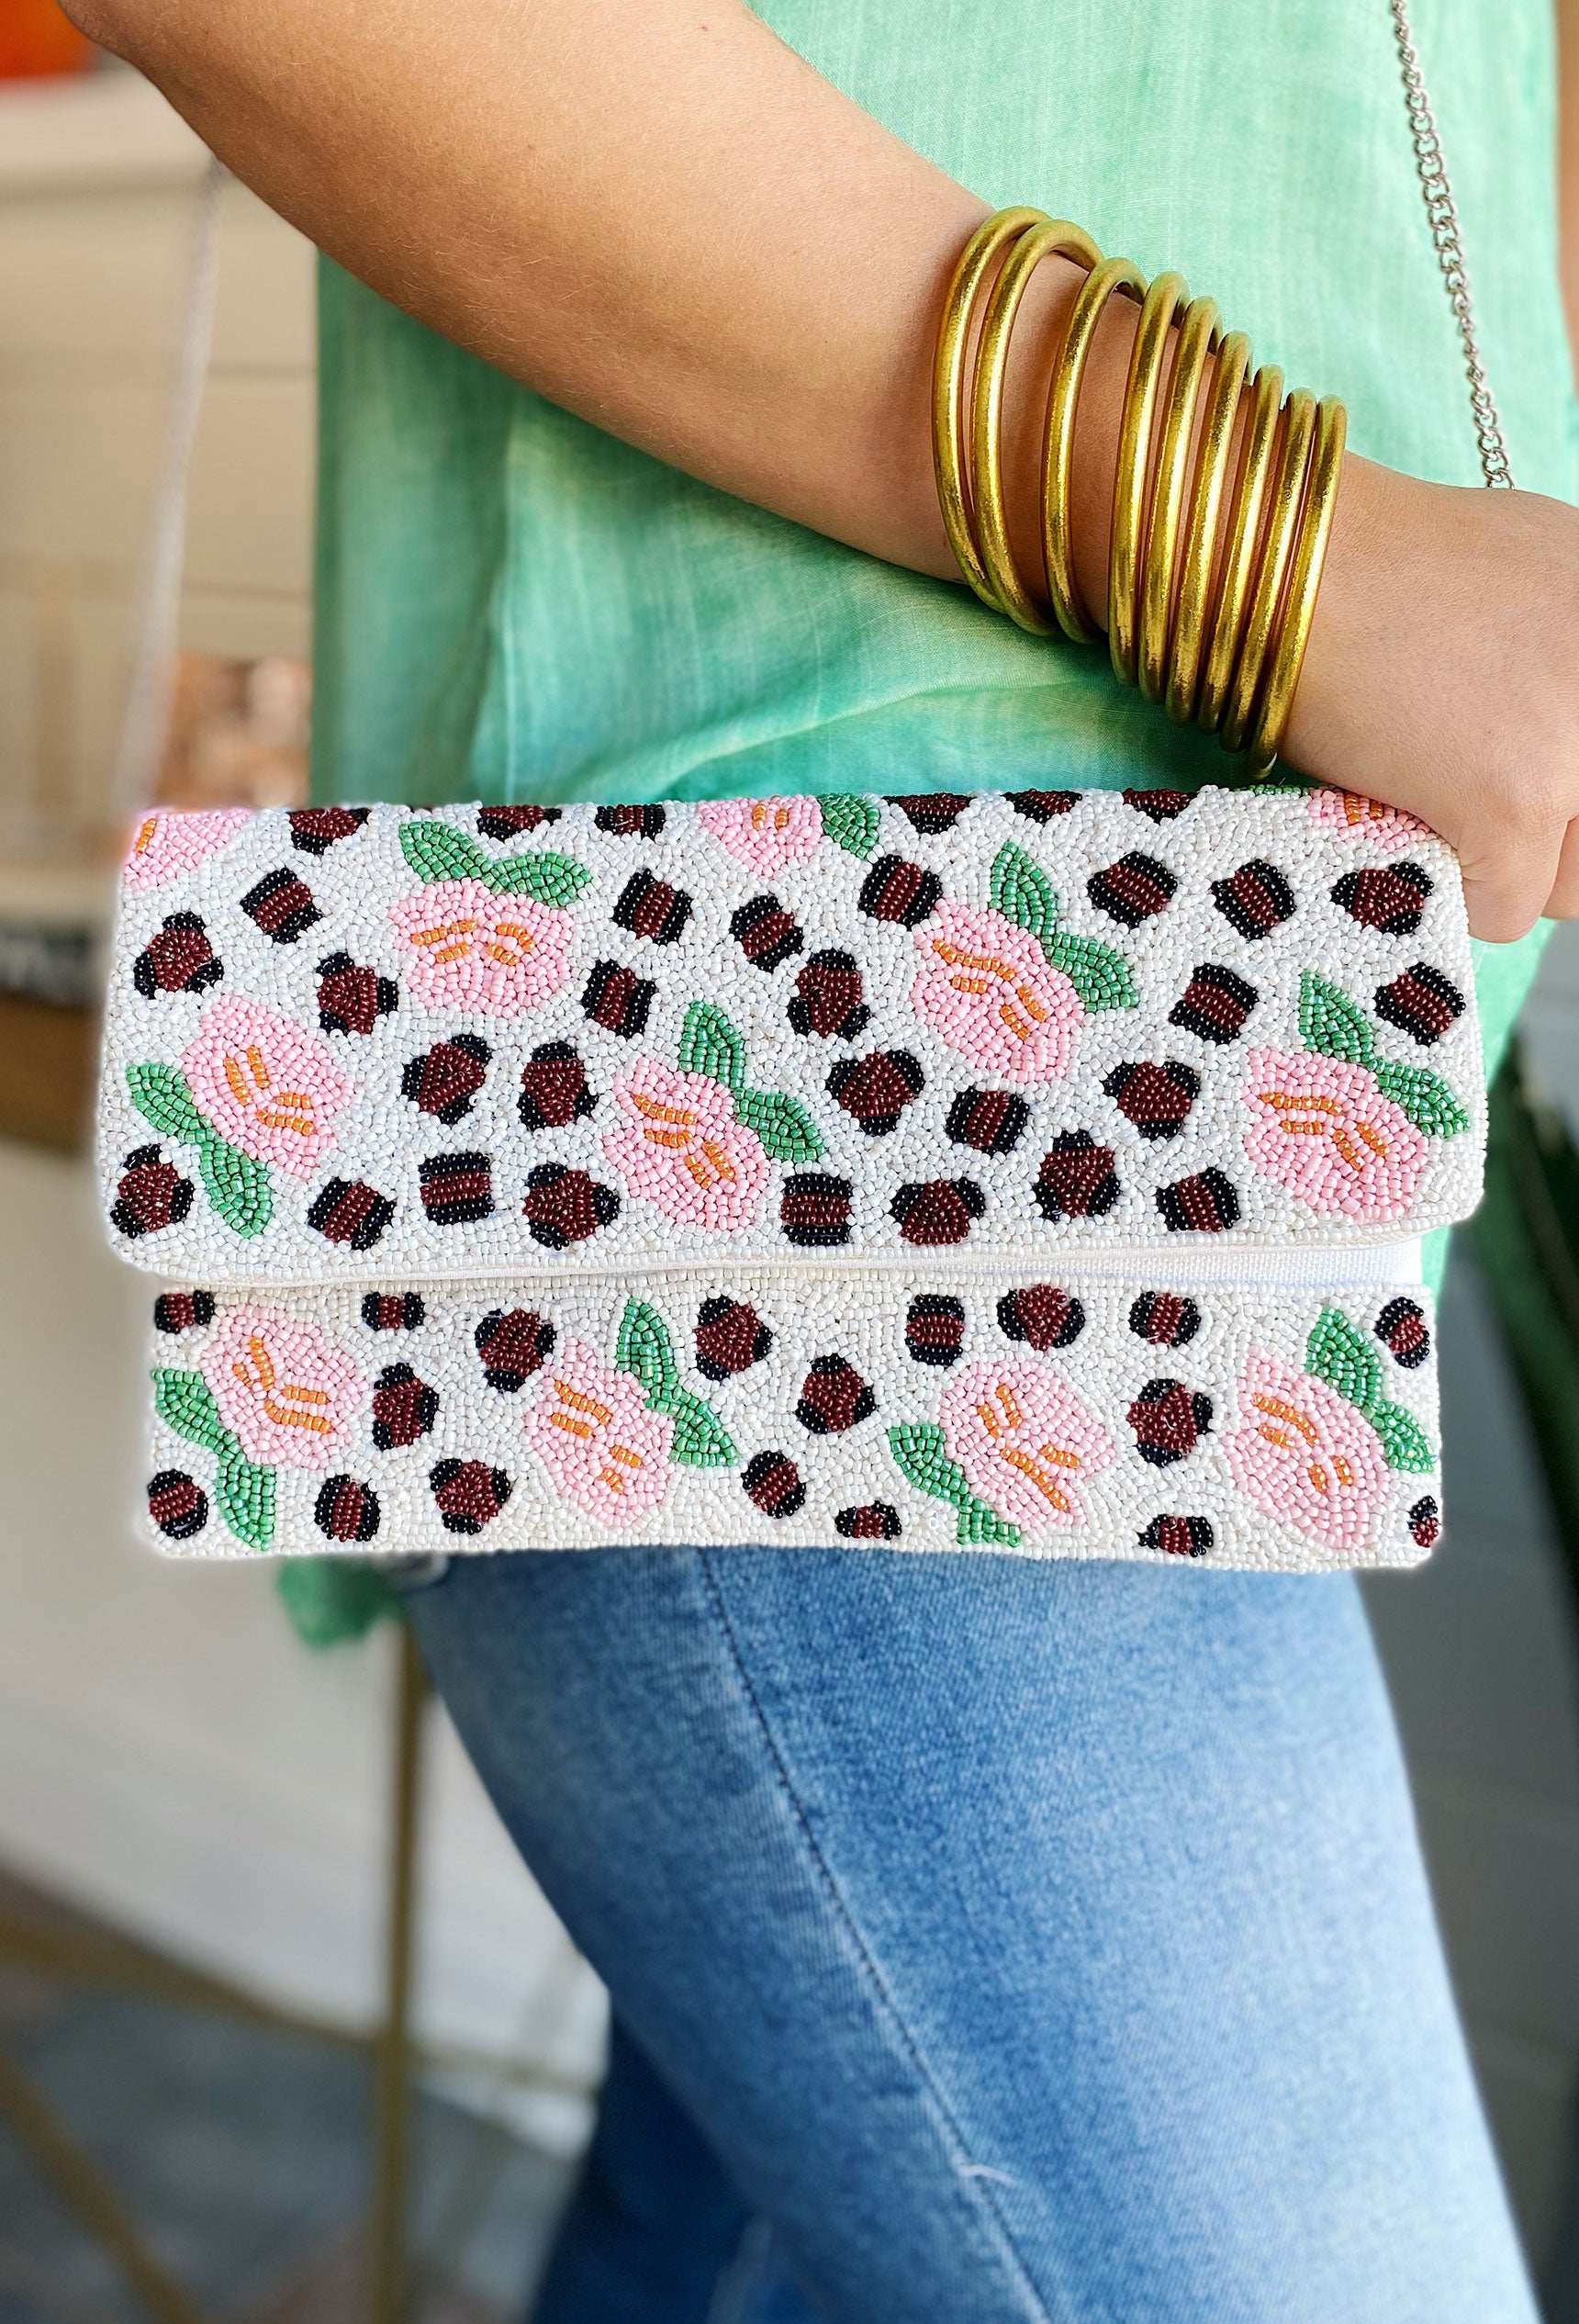 Trend Spotter Beaded Clutch, beaded clutch with crossbody bag strap, floral and leopard beaded pattern